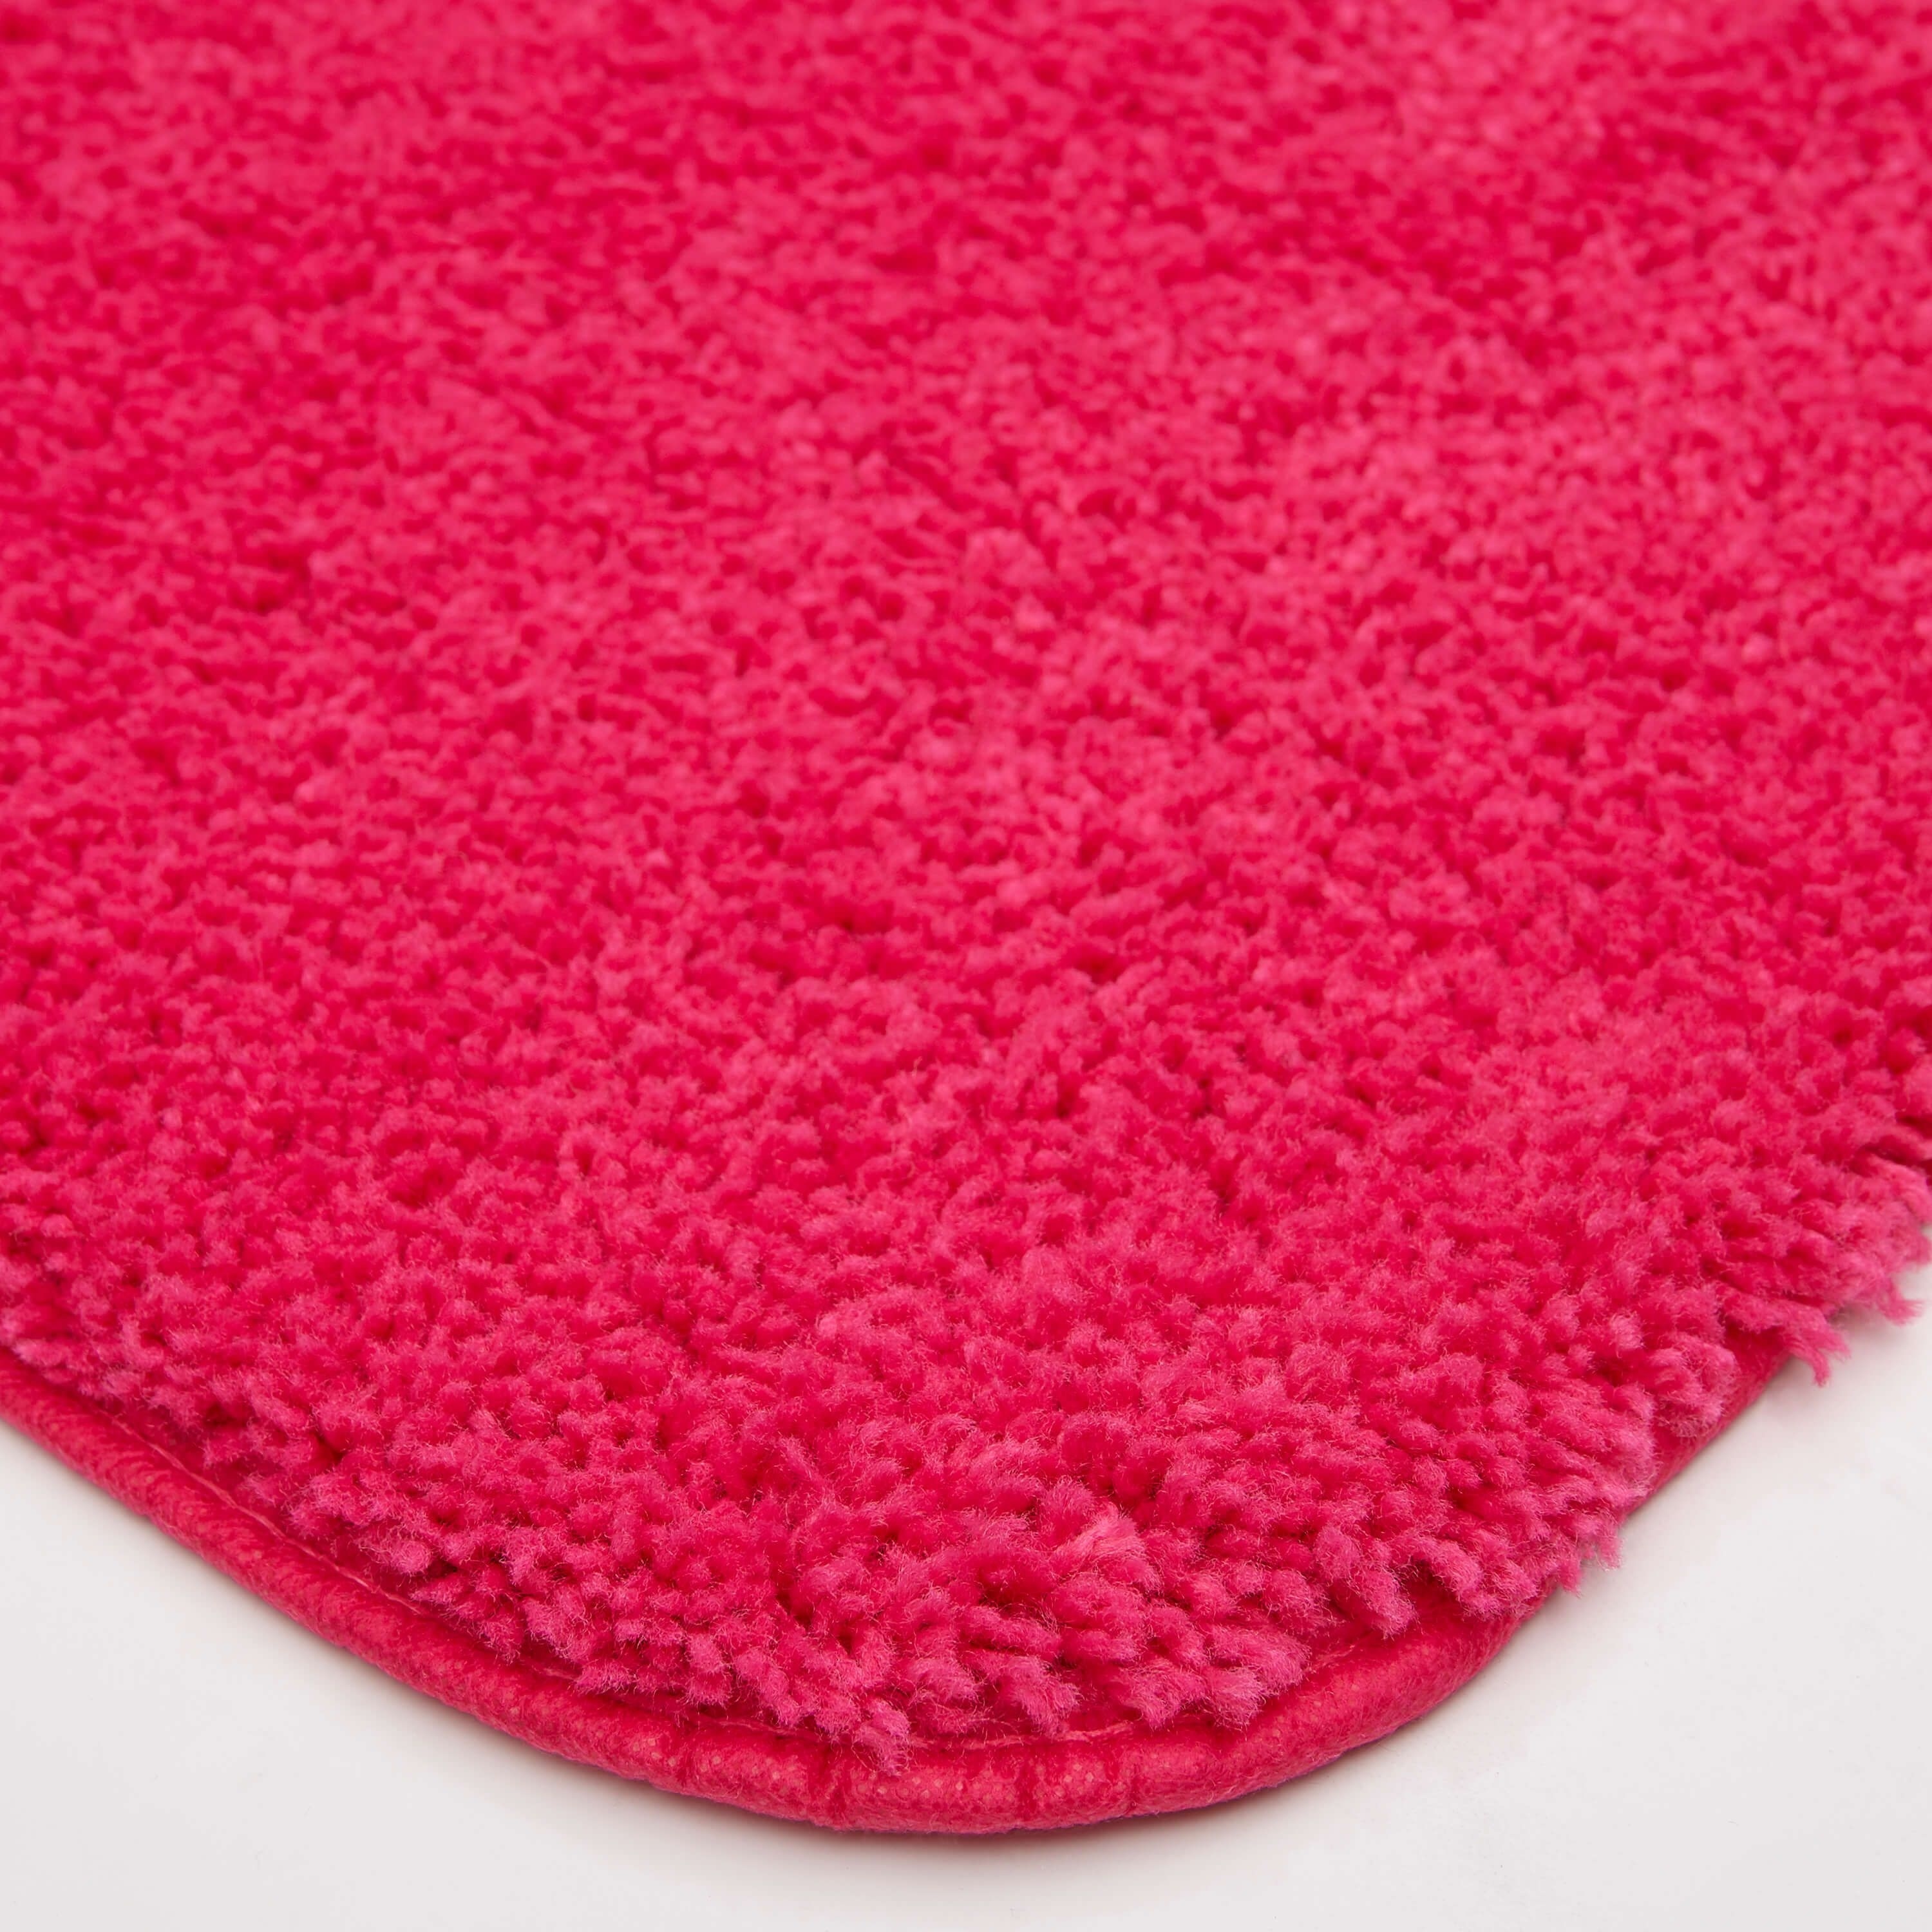 https://ak1.ostkcdn.com/images/products/is/images/direct/b8fe78494b3dd7e06c71c249bc391d91104099fe/Mohawk-Home-Pure-Perfection-Solid-Patterned-Bath-Rug.jpg